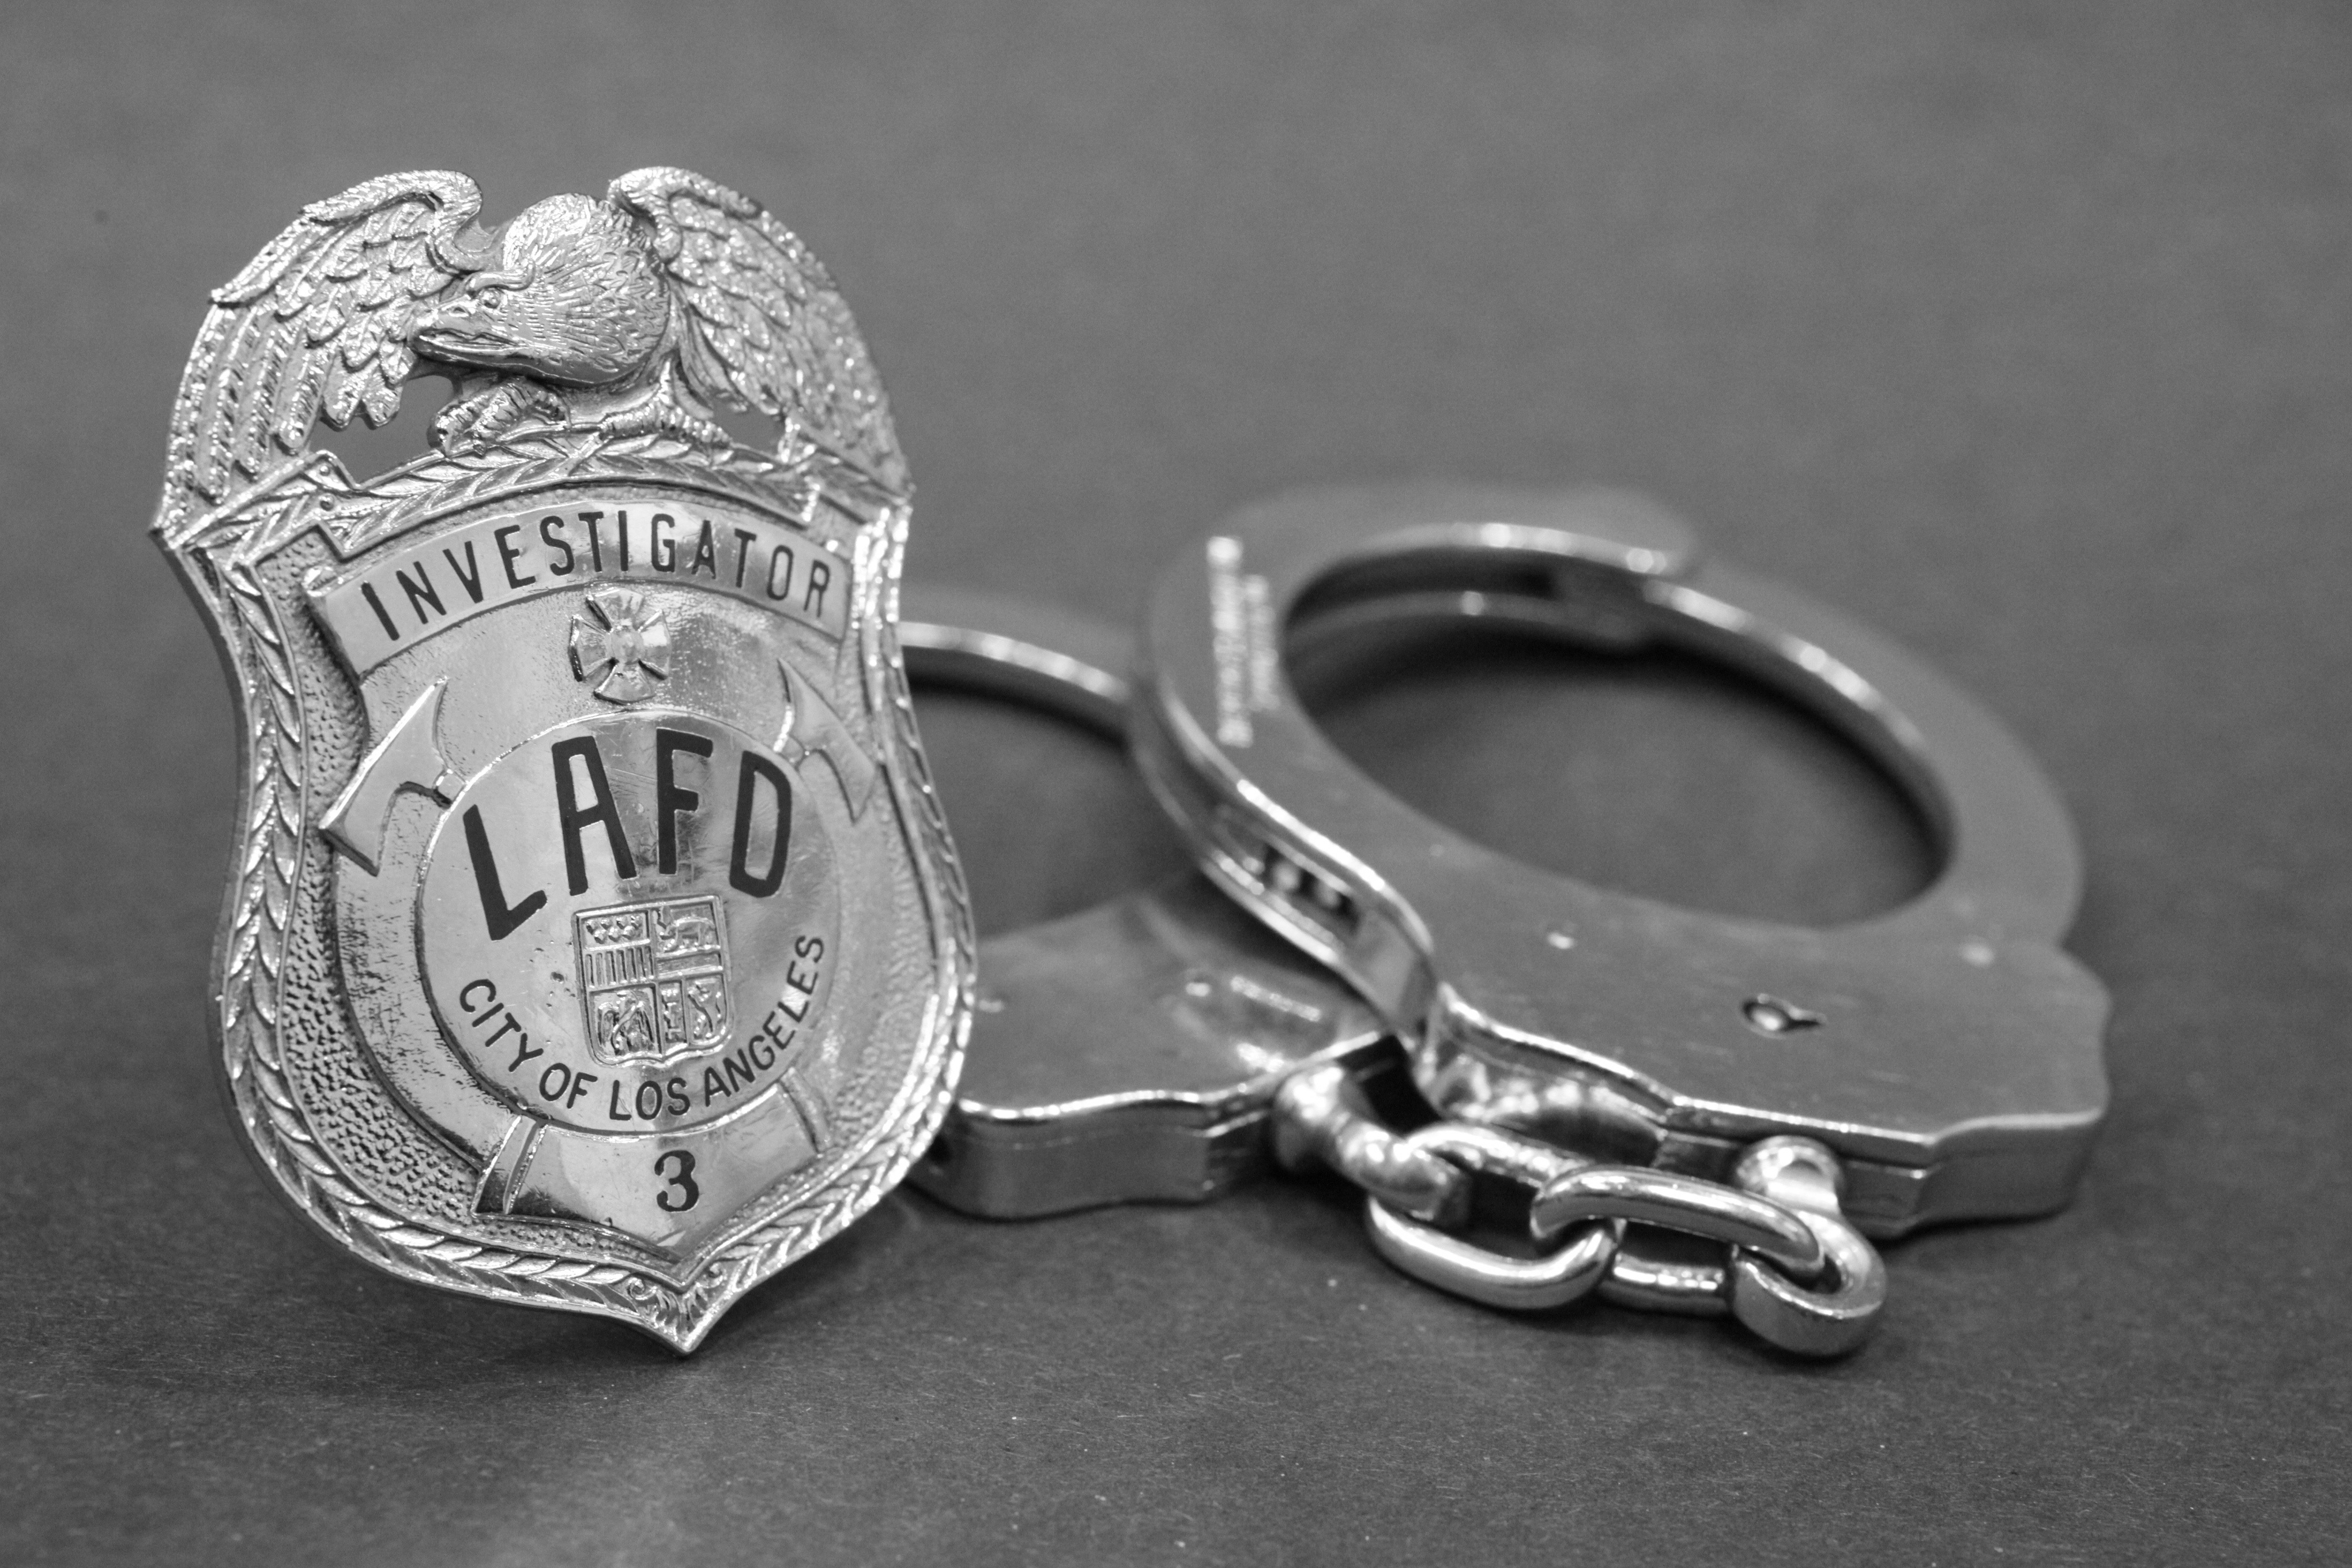 Stock photo of LAFD Investigator Badge in front of handcuffs.